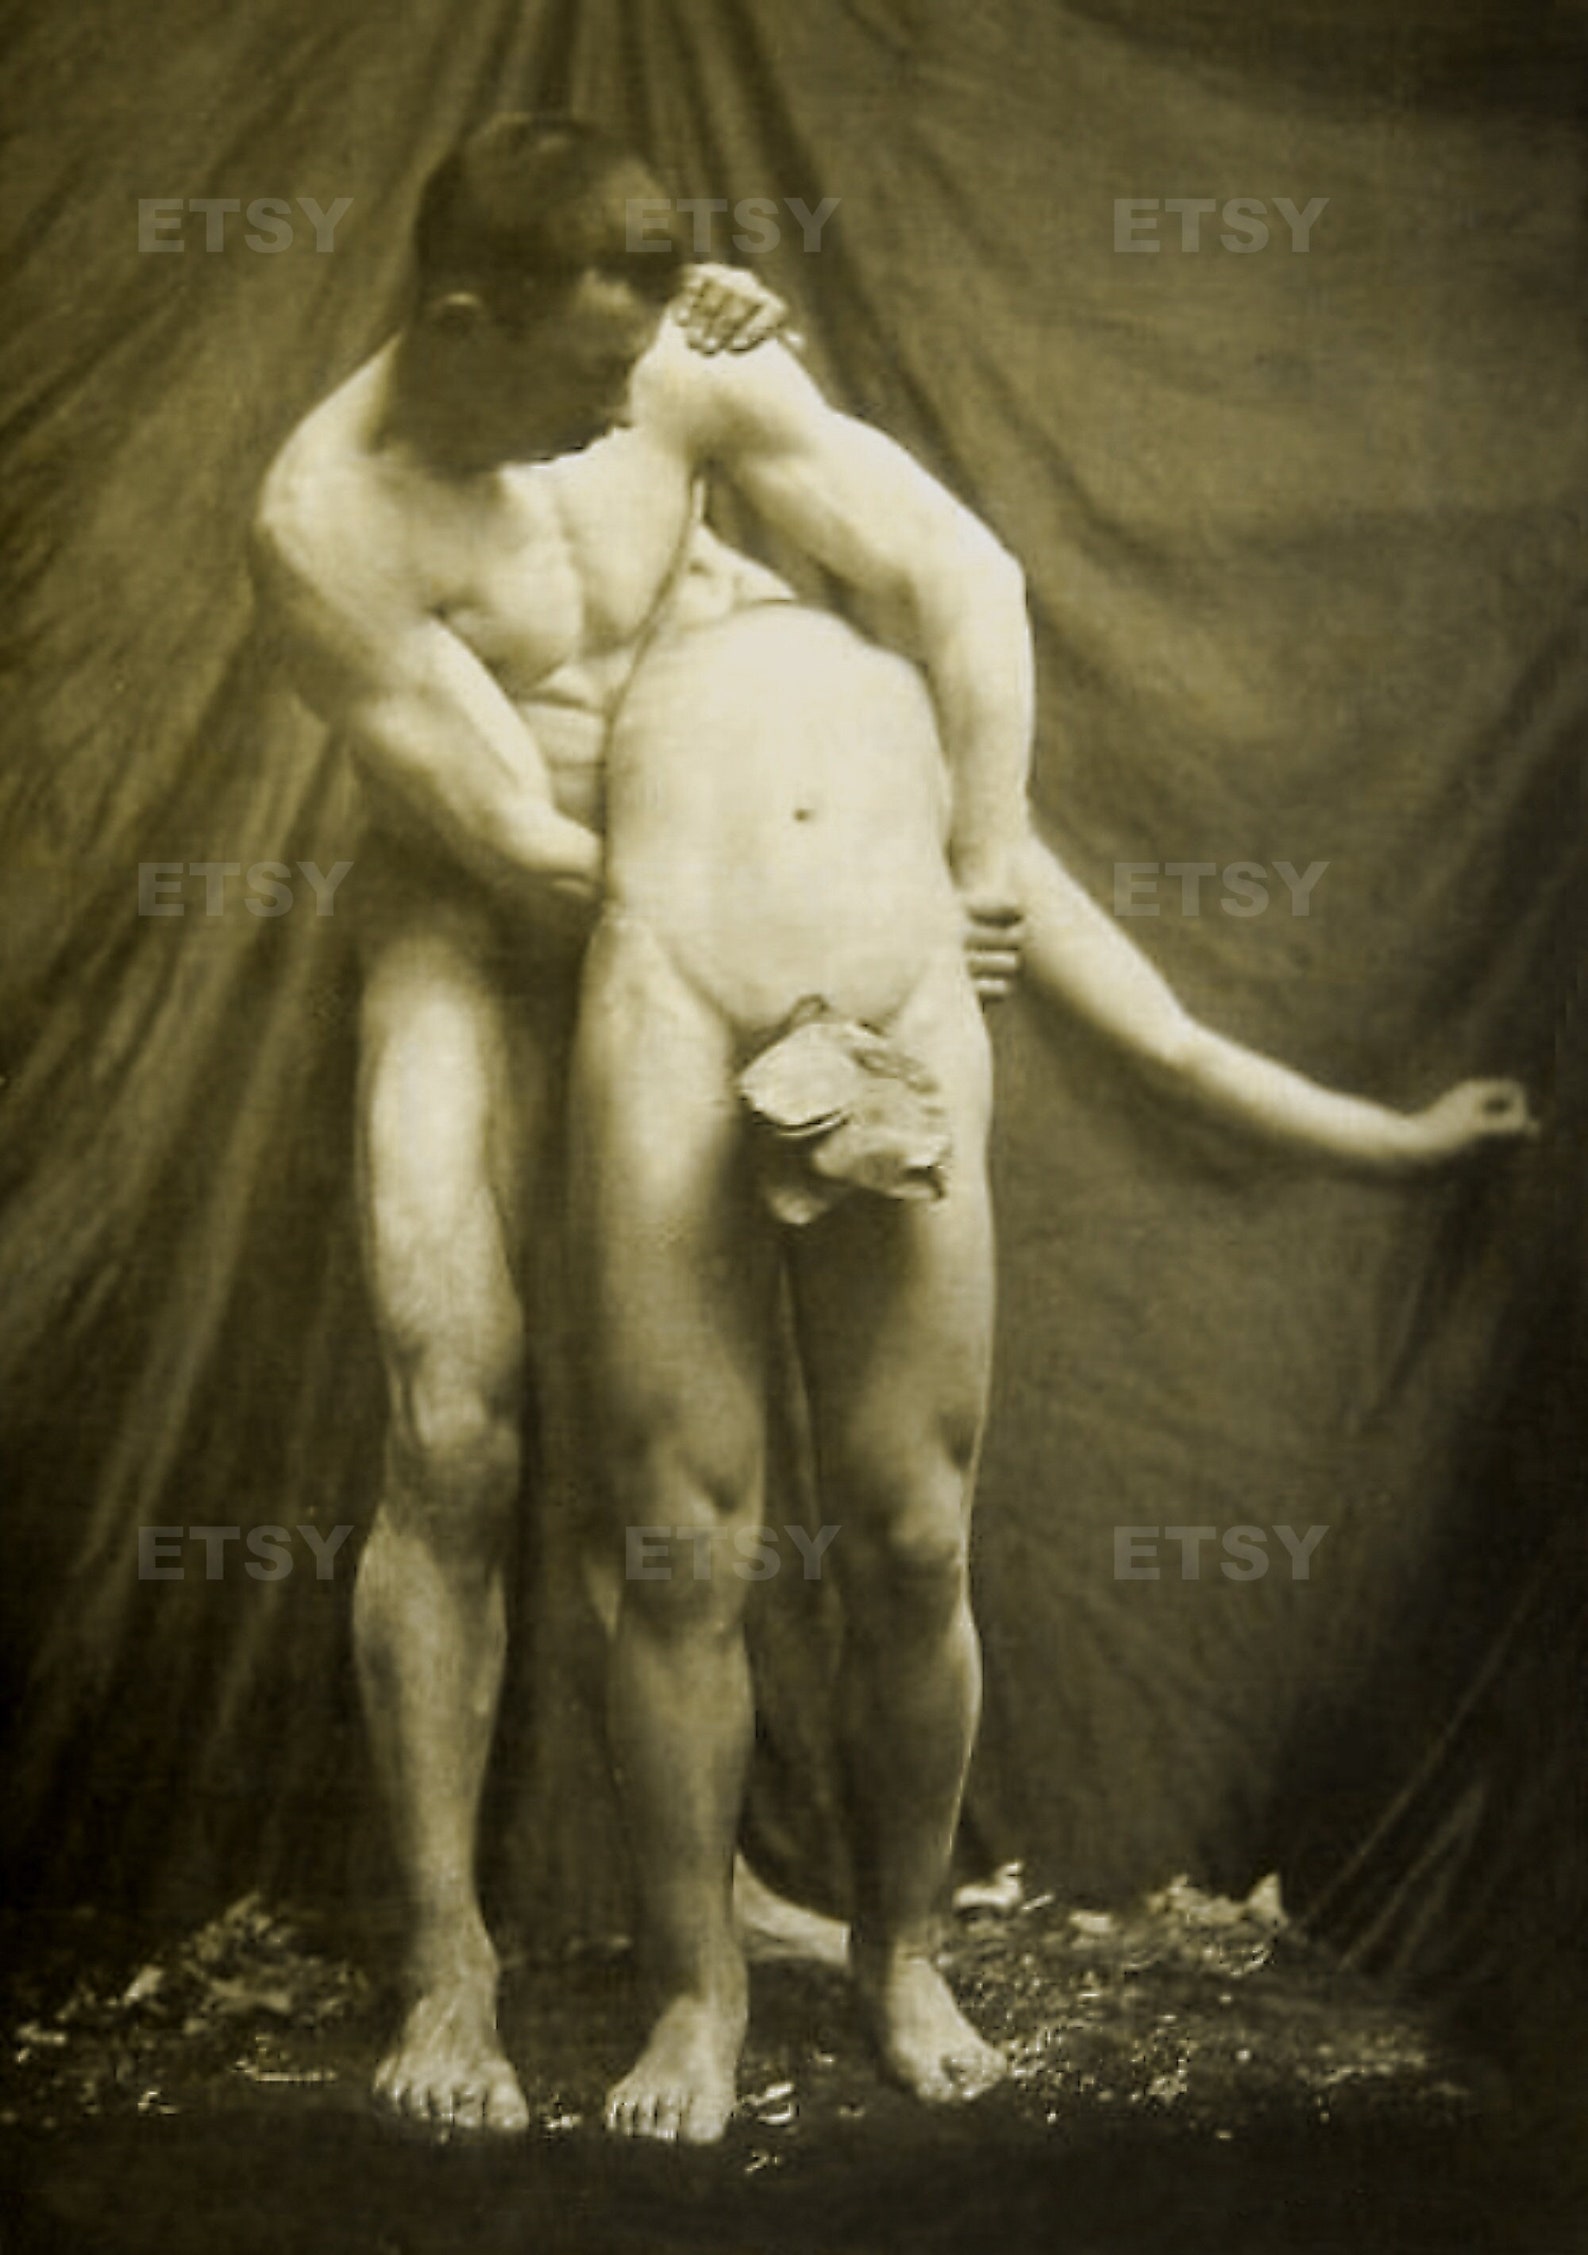 Vintage 19th Century Porn - 19th century gay porn - Best adult videos and photos